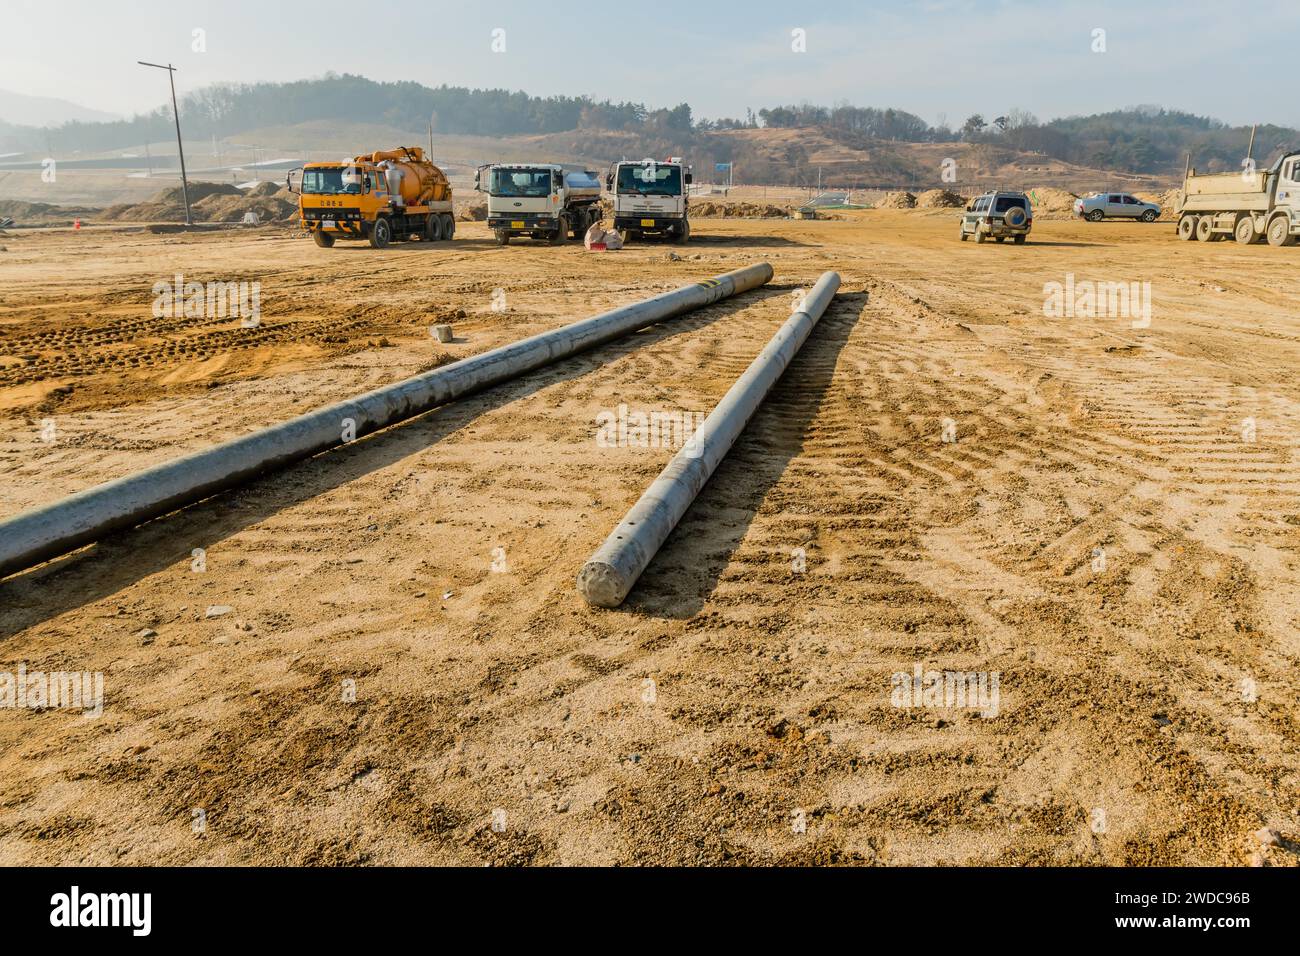 Daejeonn, South Korea, December 25, 2019: Cars and trucks parked at new construction site with utility poles on ground in foreground. For editorial Stock Photo